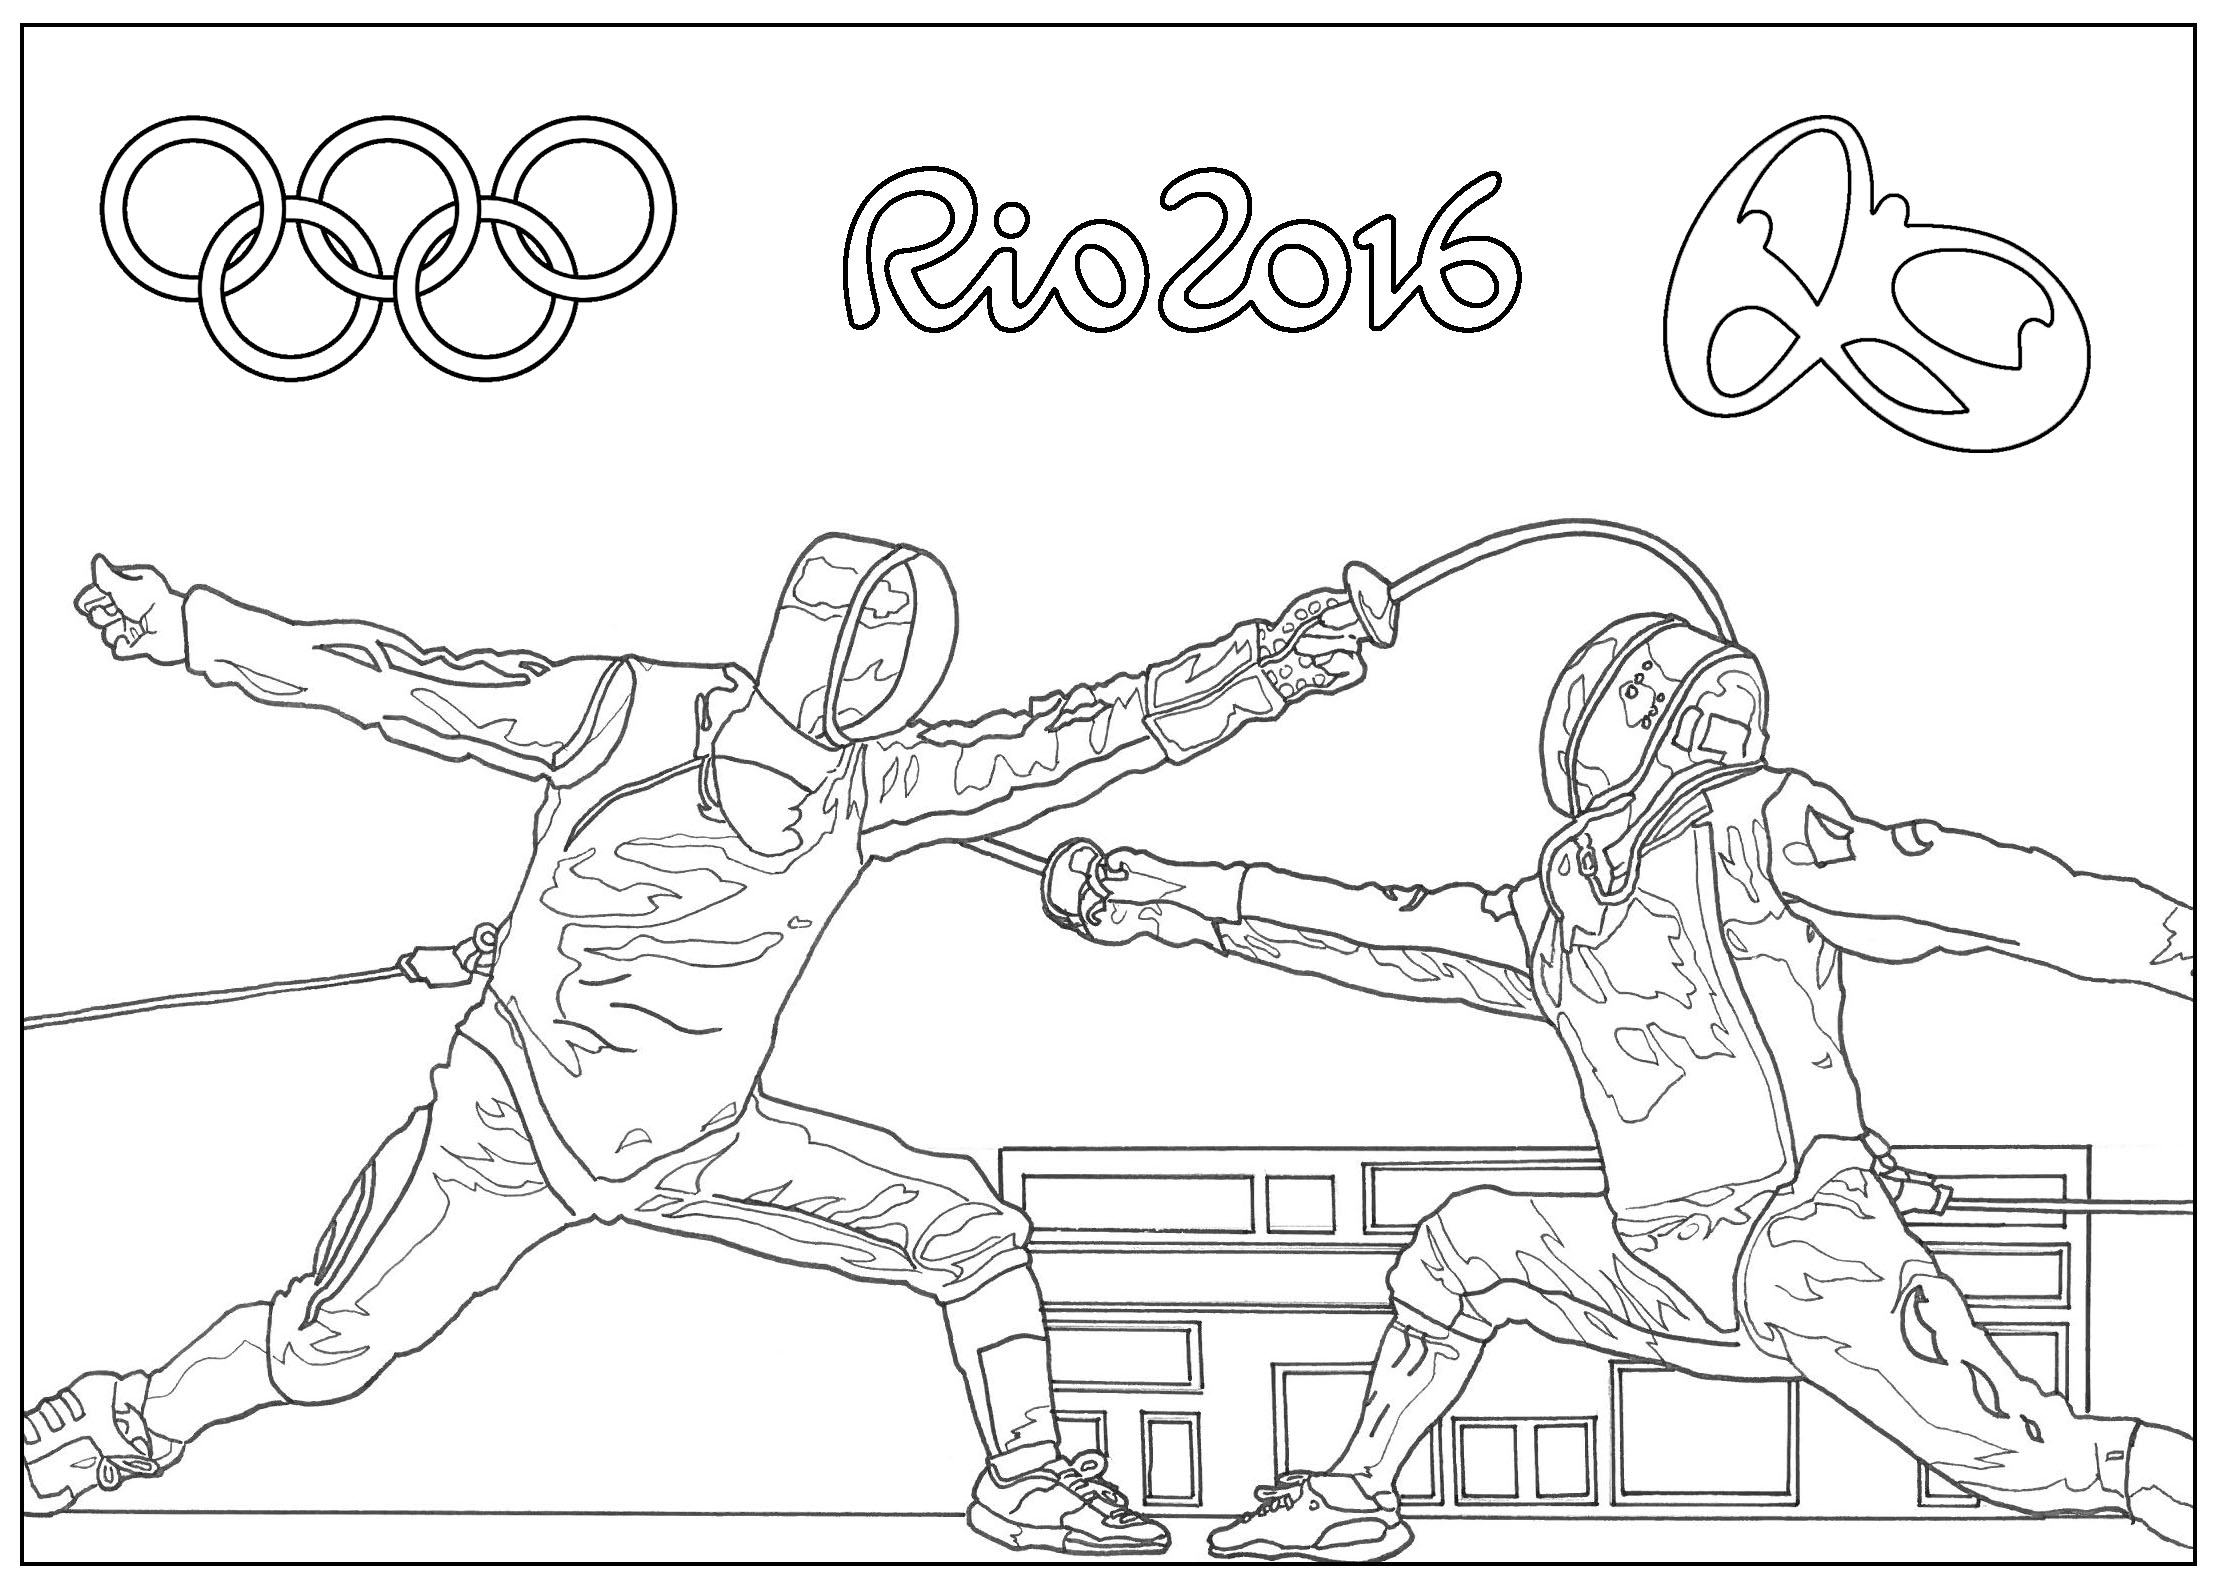 Coloring Olympic Games Rio 2016: Fencing. By Sofian